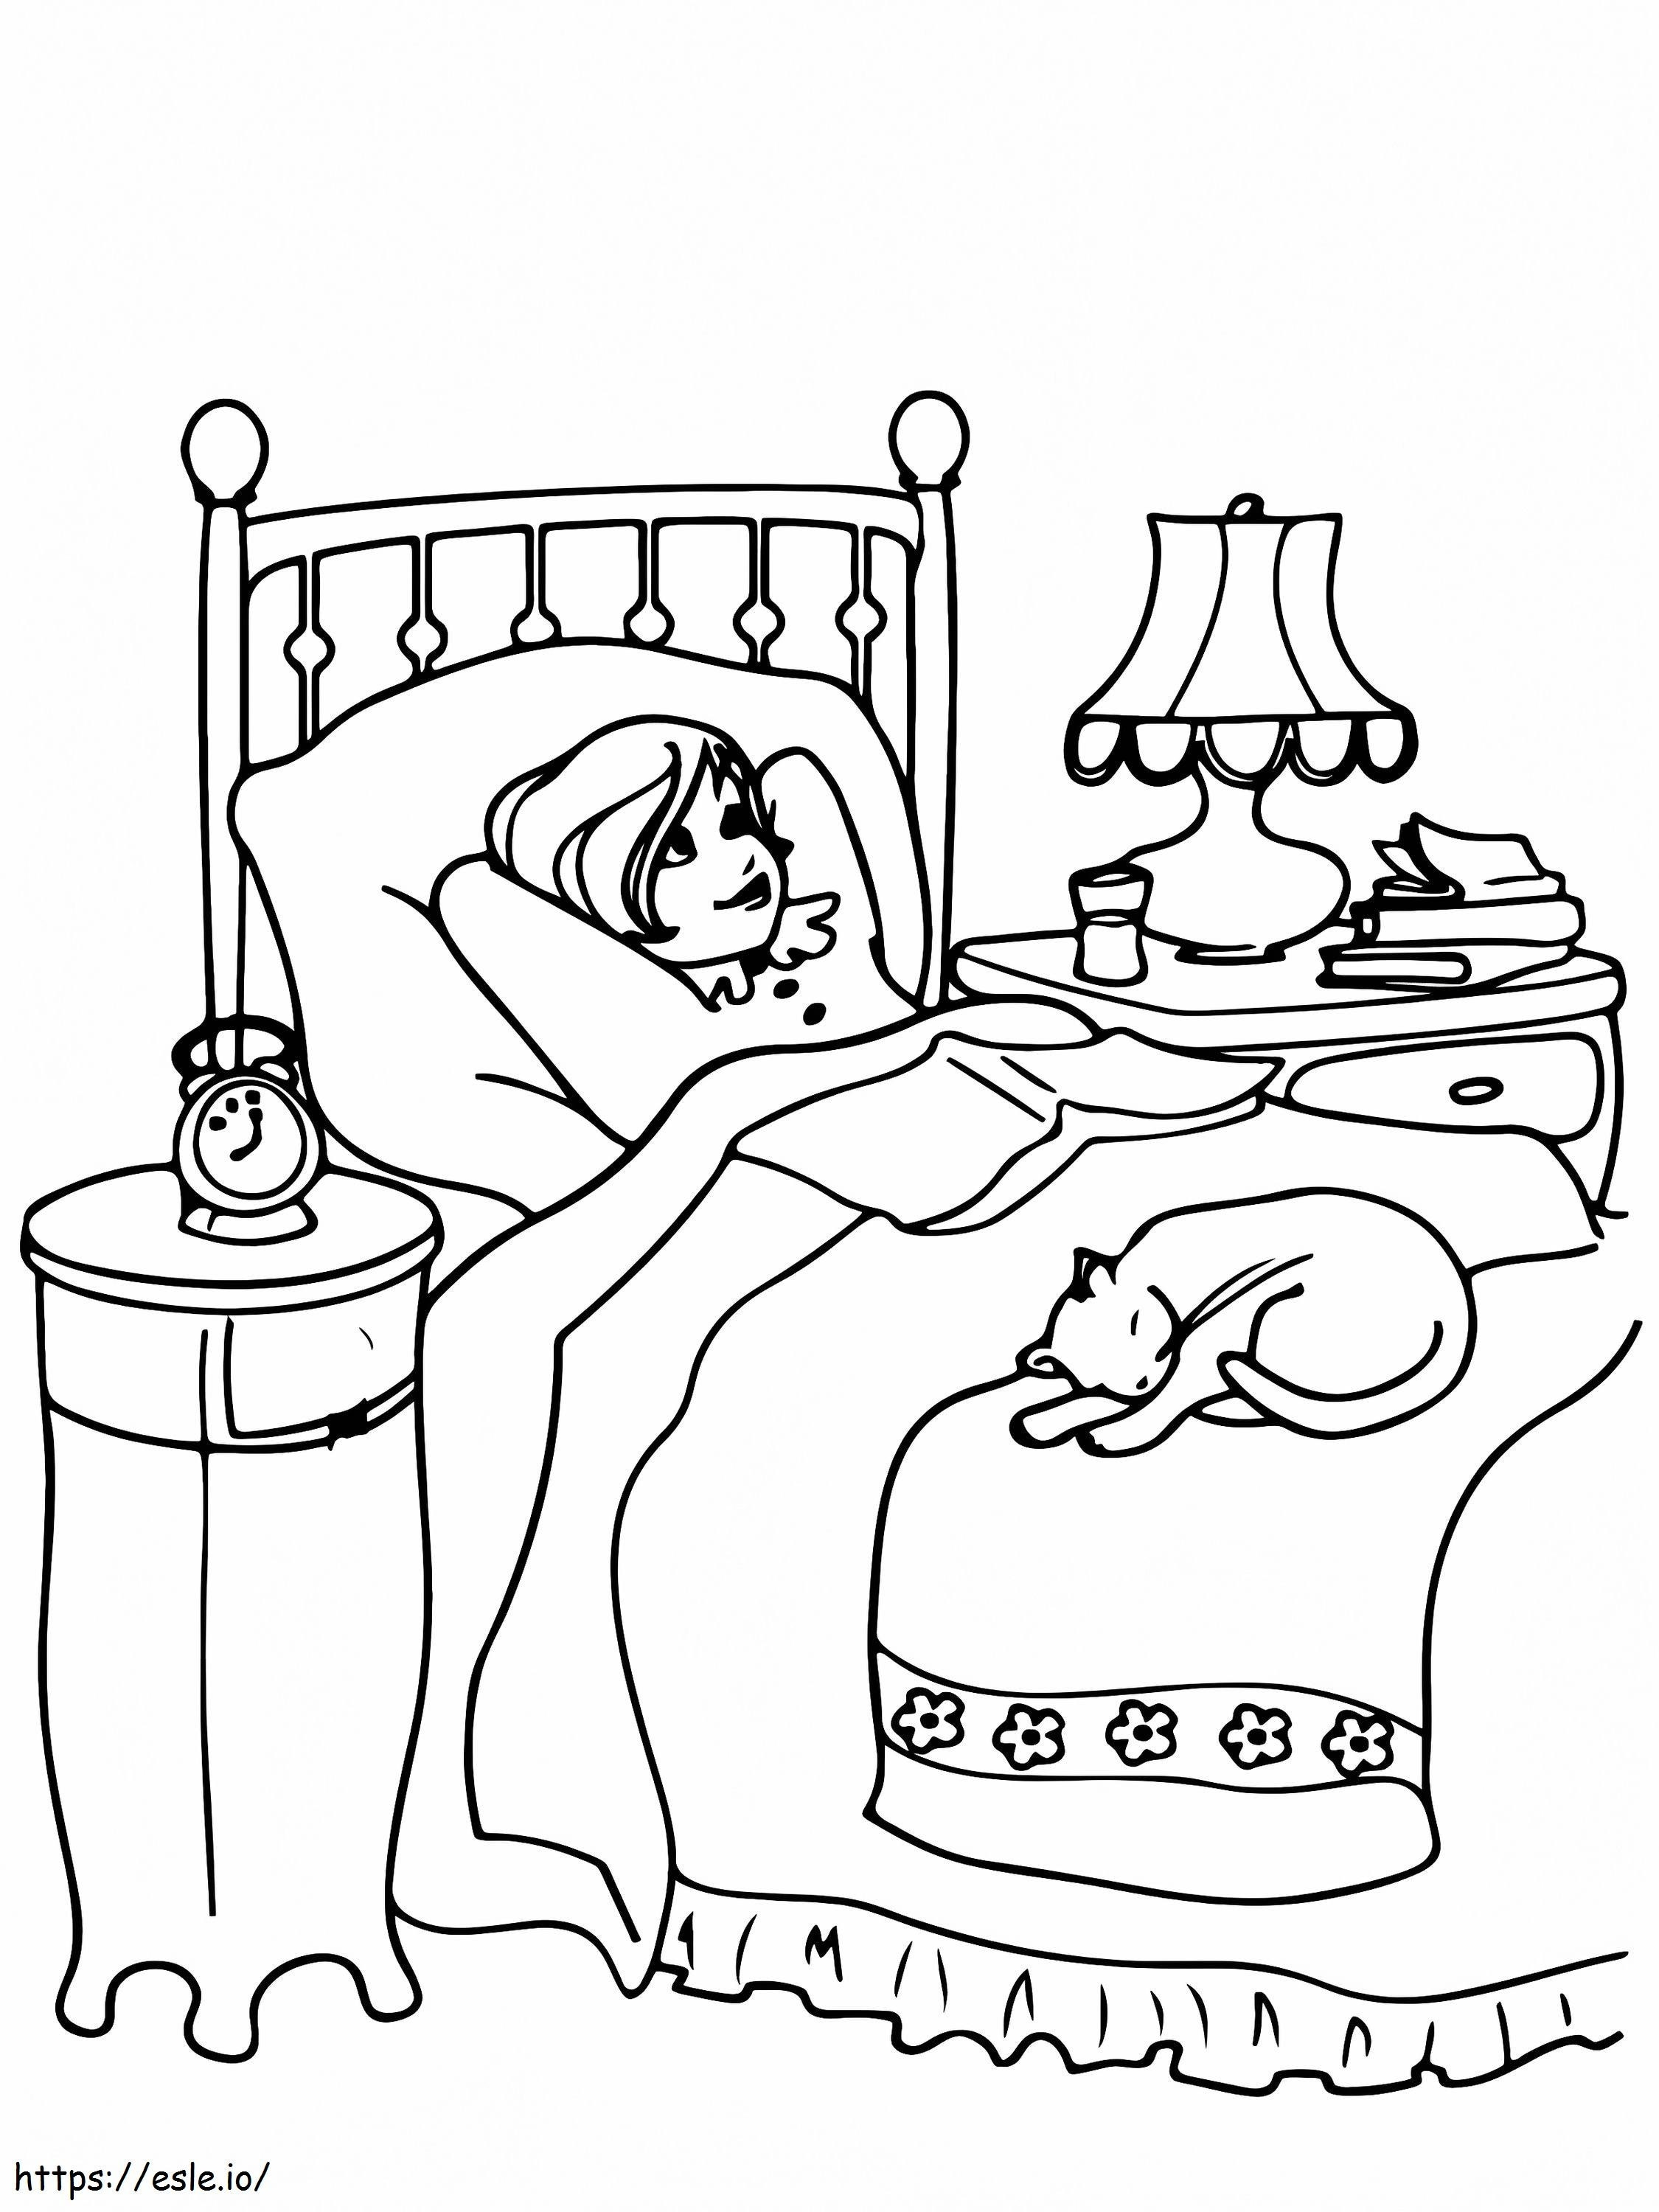 Resting Princess And The Pea coloring page